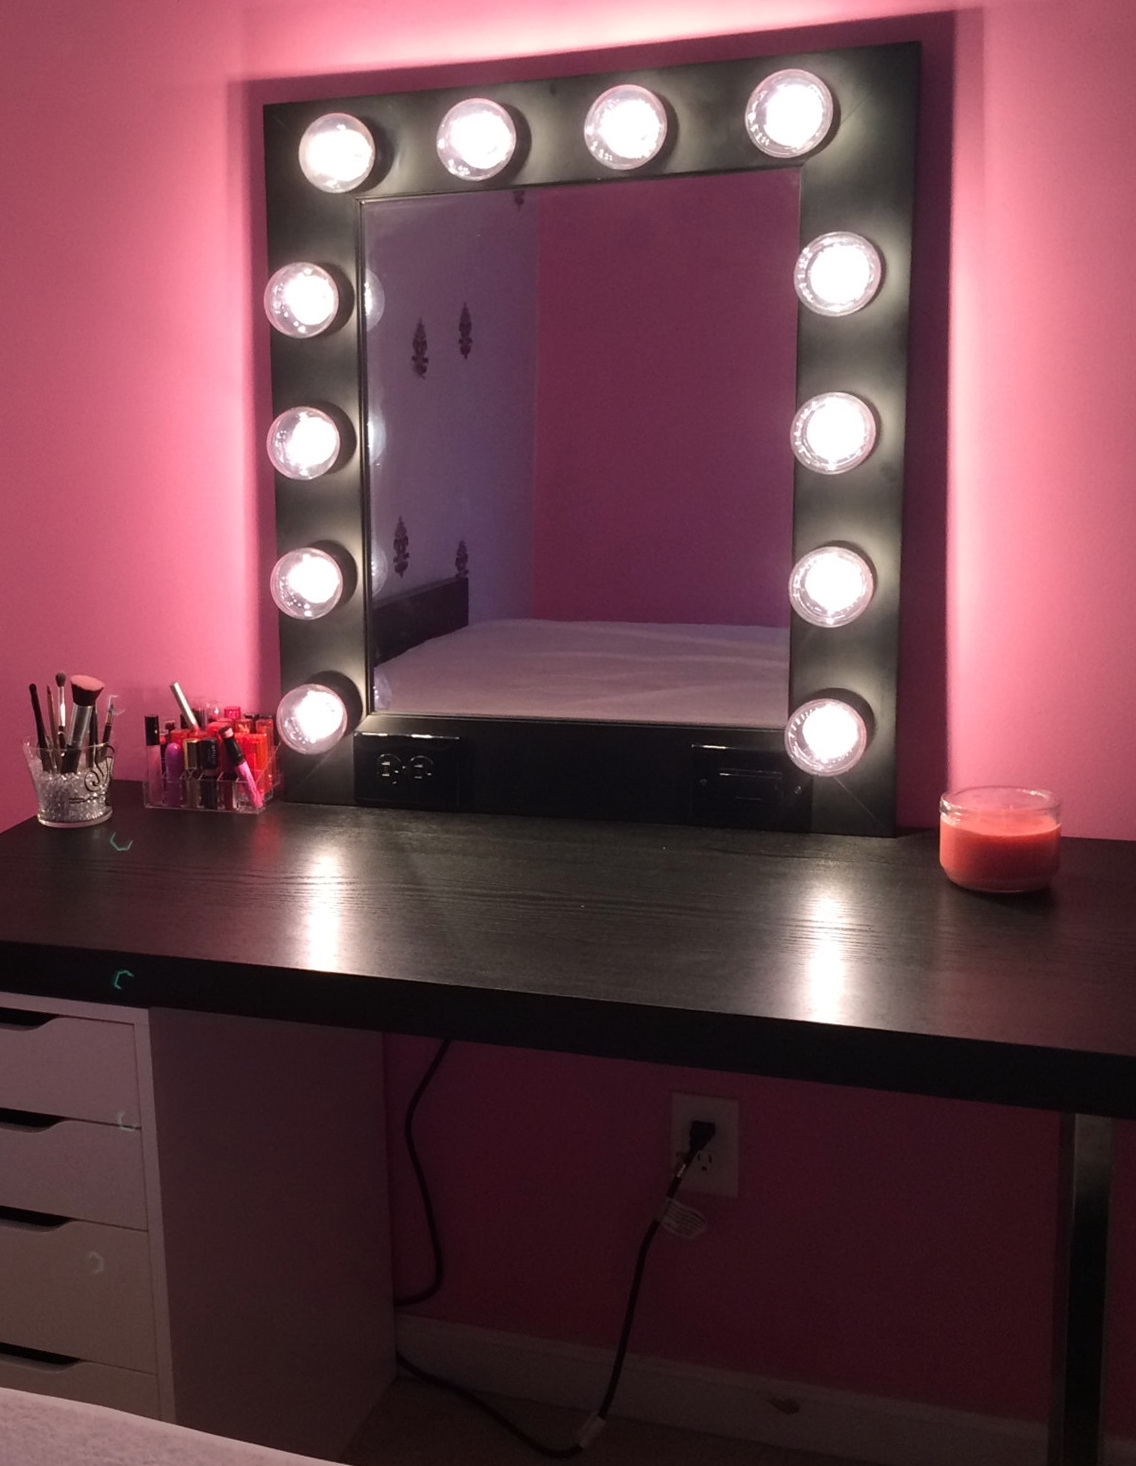 Discover the Best Magnifying Mirrors for Makeup: Top Picks for High Magnification, LED Lighting, and Wall Mount Options - 20x Magnifying Mirrors Available in Canada and Beyond